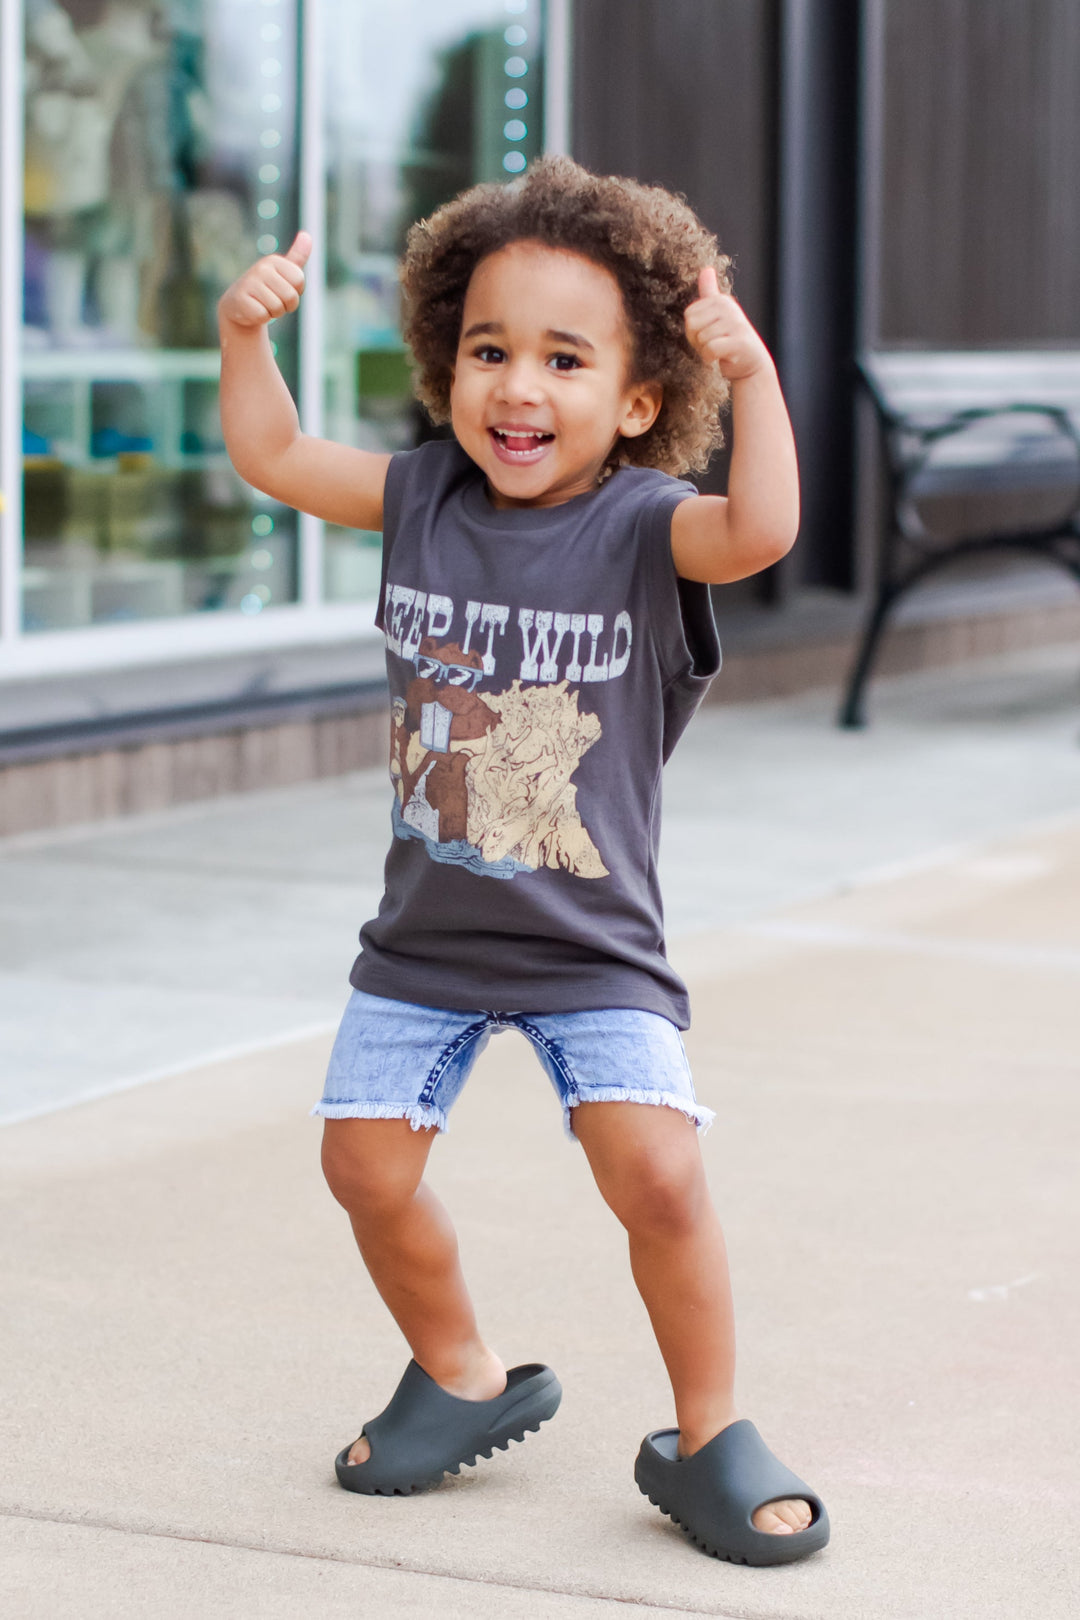 Tiny Whales - Keep It Wild Muscle Tee in Vintage Black